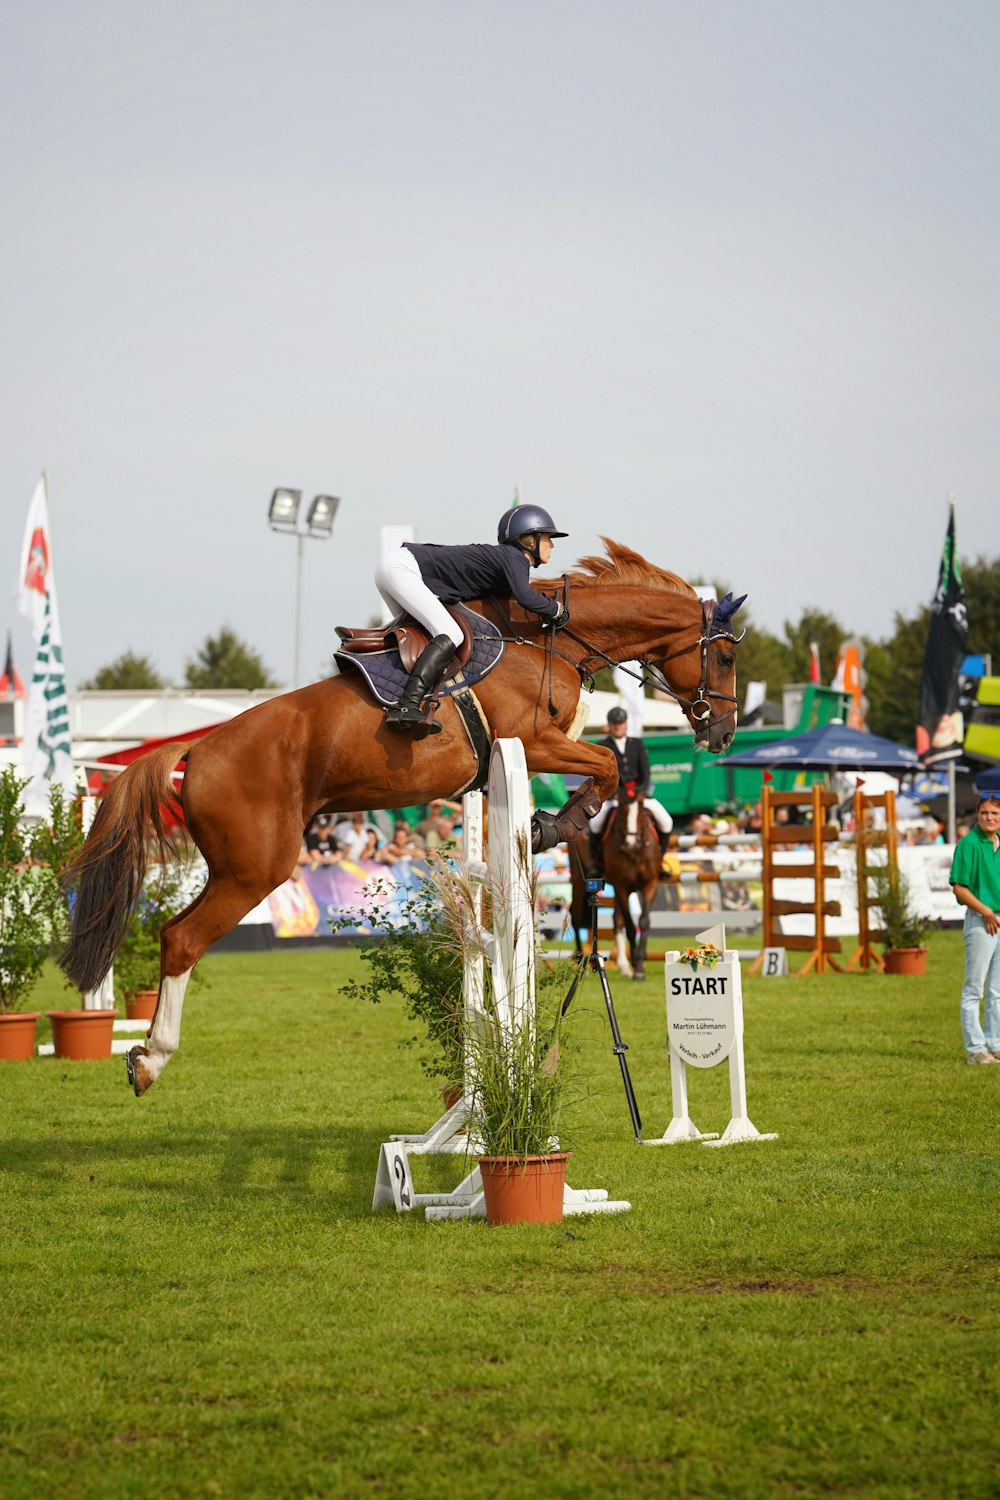 a person on a horse jumping over an obstacle